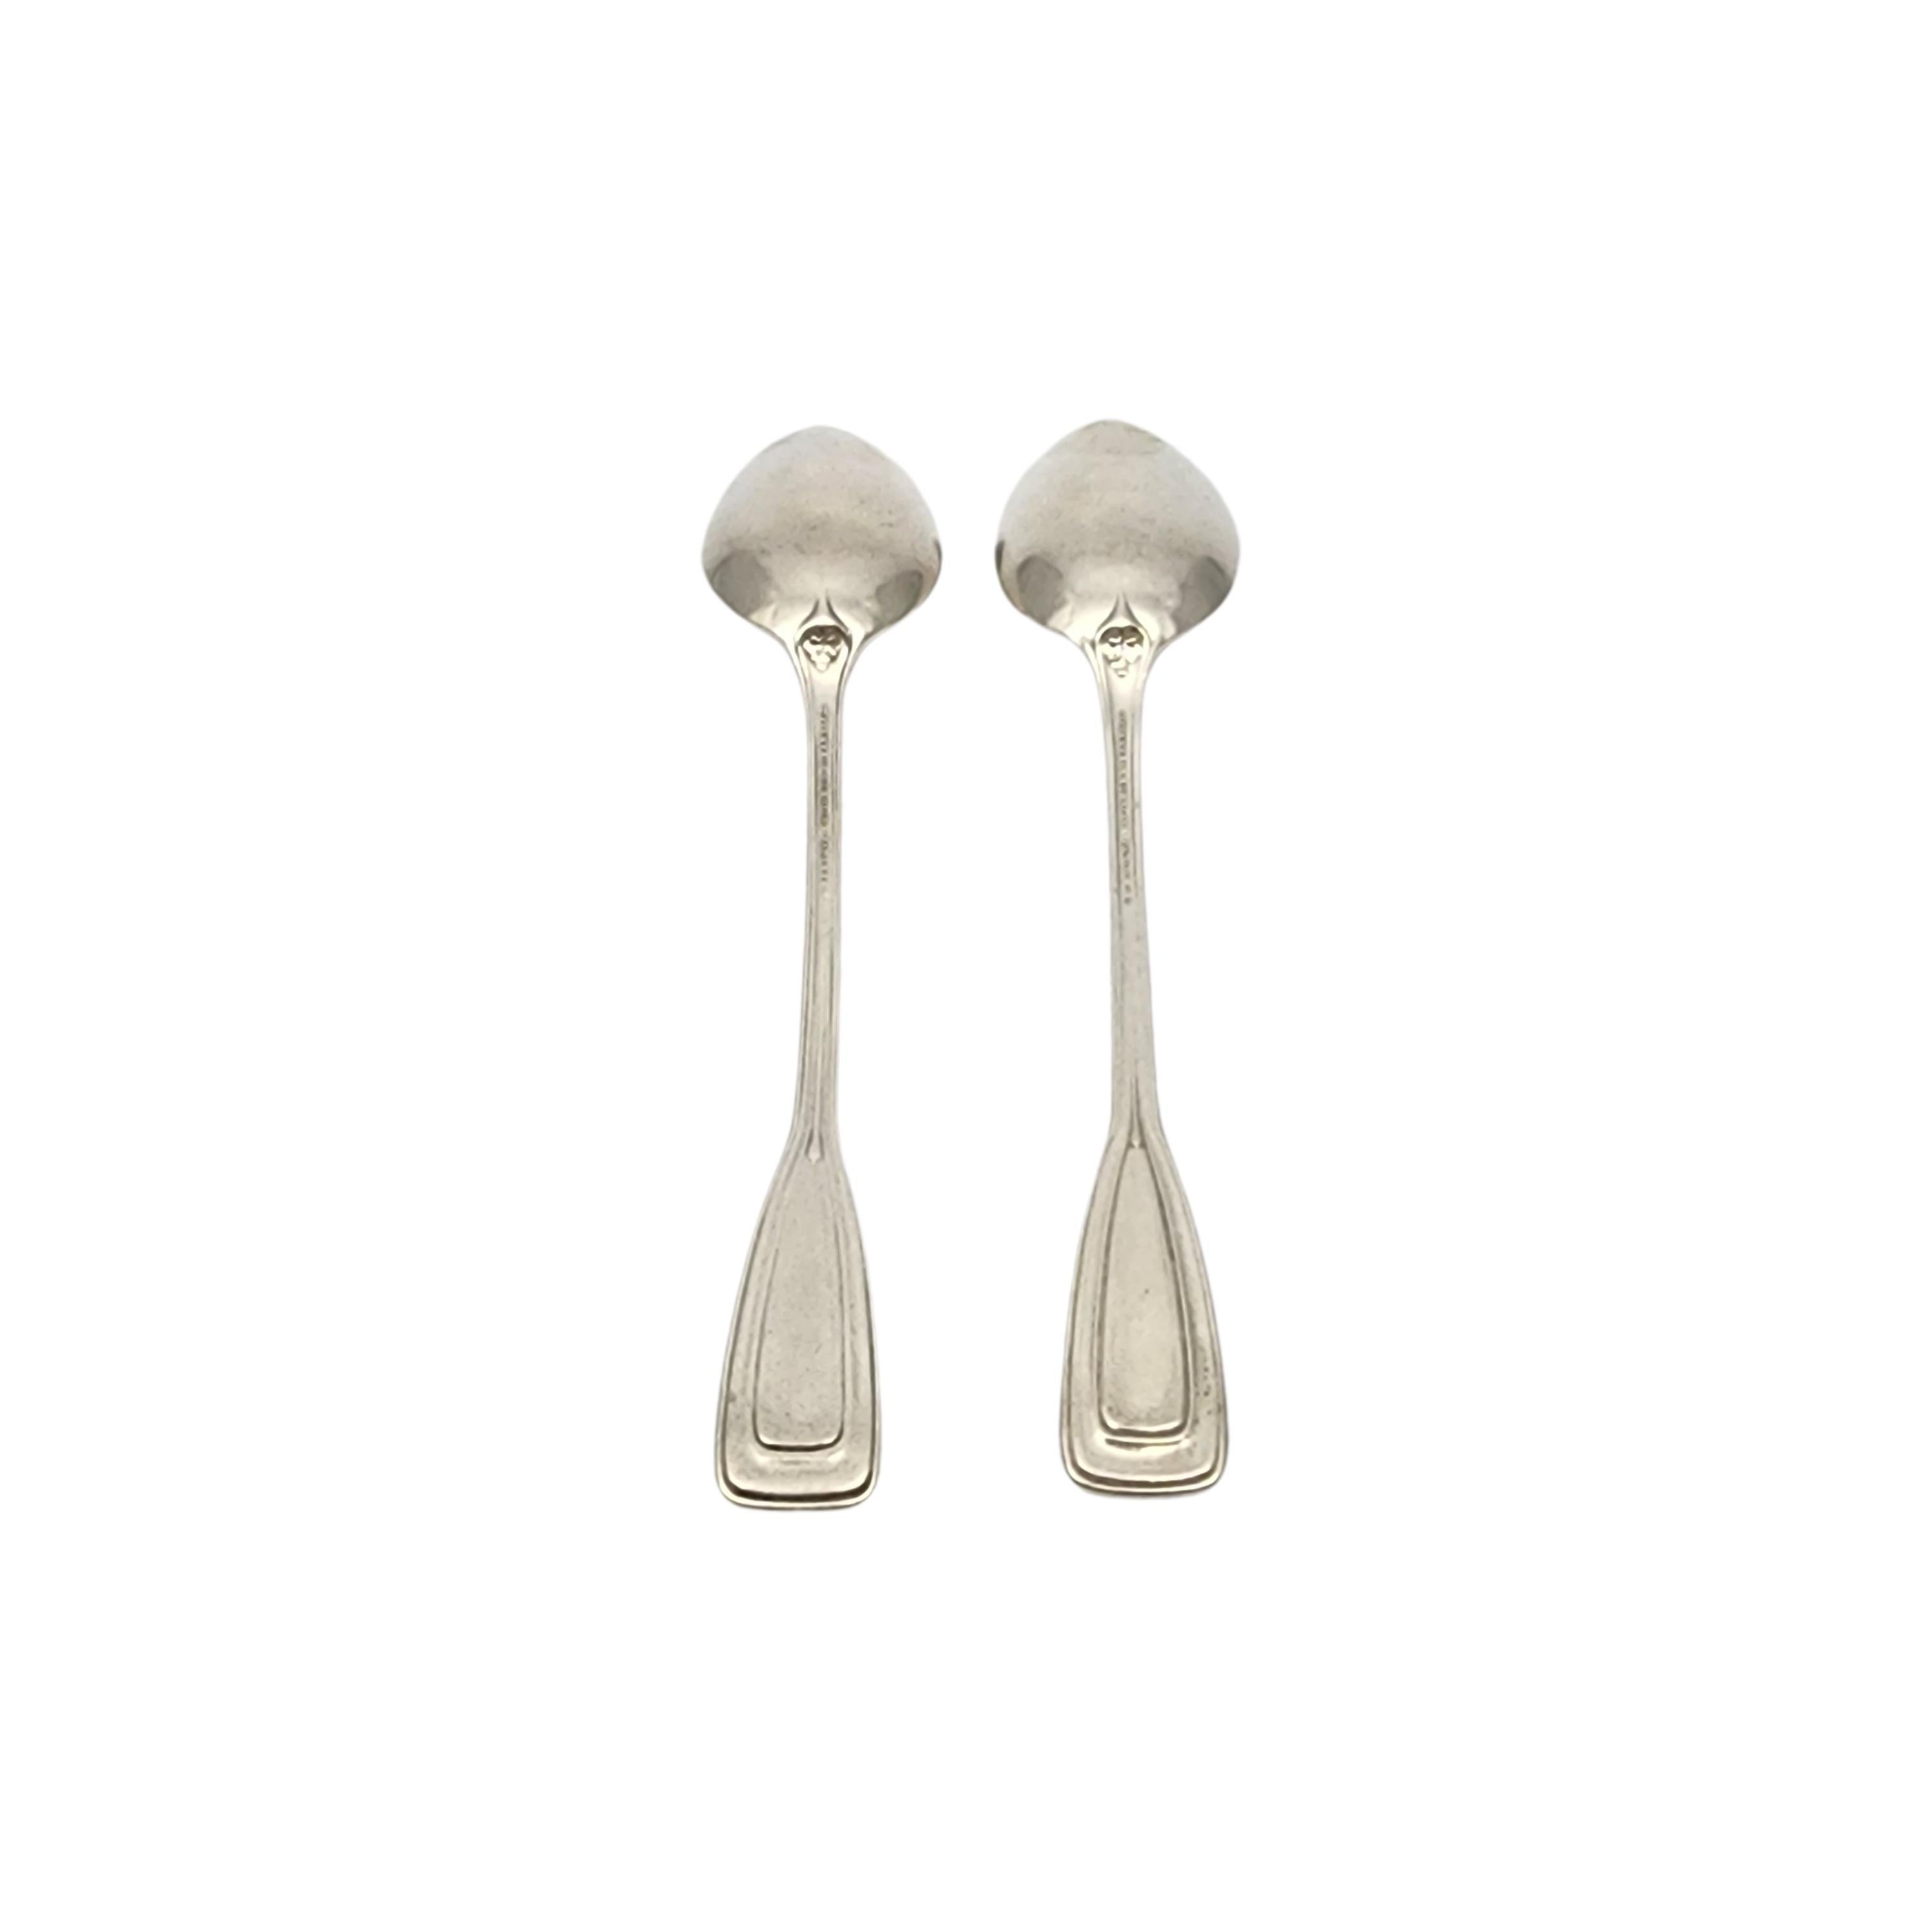 Set of 2 sterling silver teaspoons by Tiffany & Co in the St. Dunstan pattern with monogram.

Monogram appears to be W

Designed by Albert A. Southwick in 1909 and named for the patron saint of gold and silversmiths, Tiffany's St. Dunstan pattern is